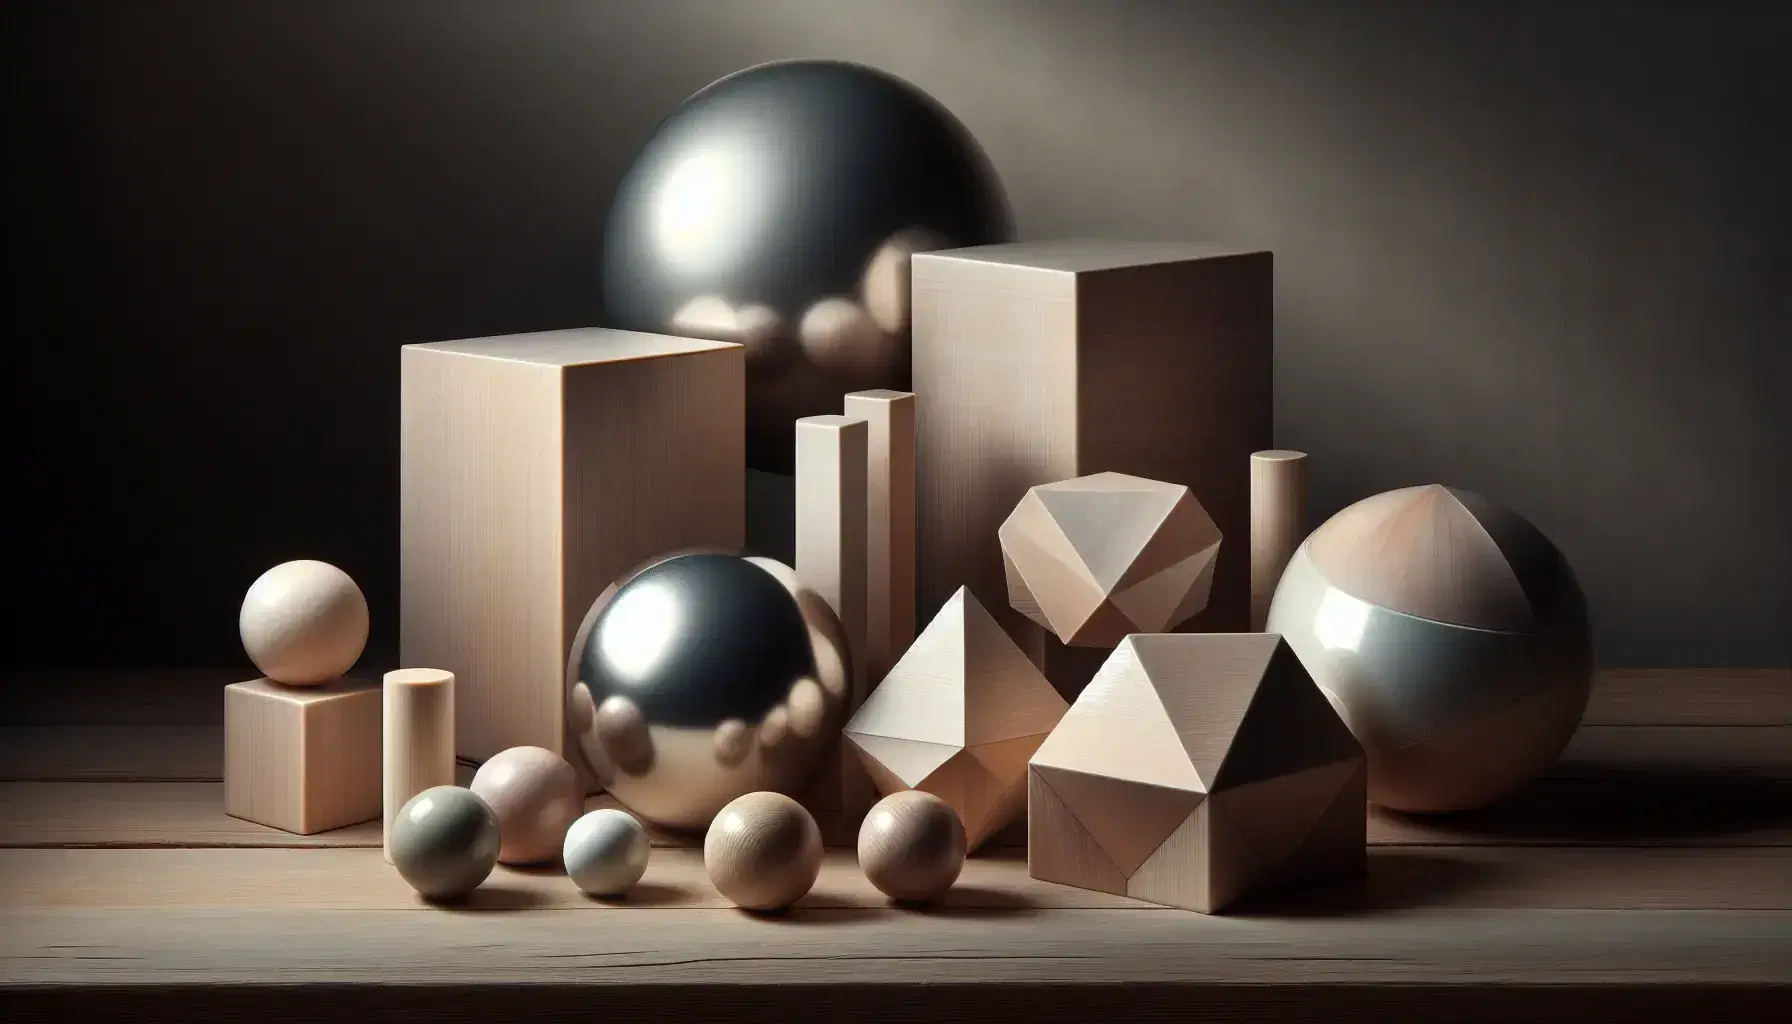 Still life with geometric shapes including a reflective metal sphere, wooden cube, dark tetrahedron, glass cylinder, and cone, alongside terracotta spheres and wooden sticks on a gradient background.